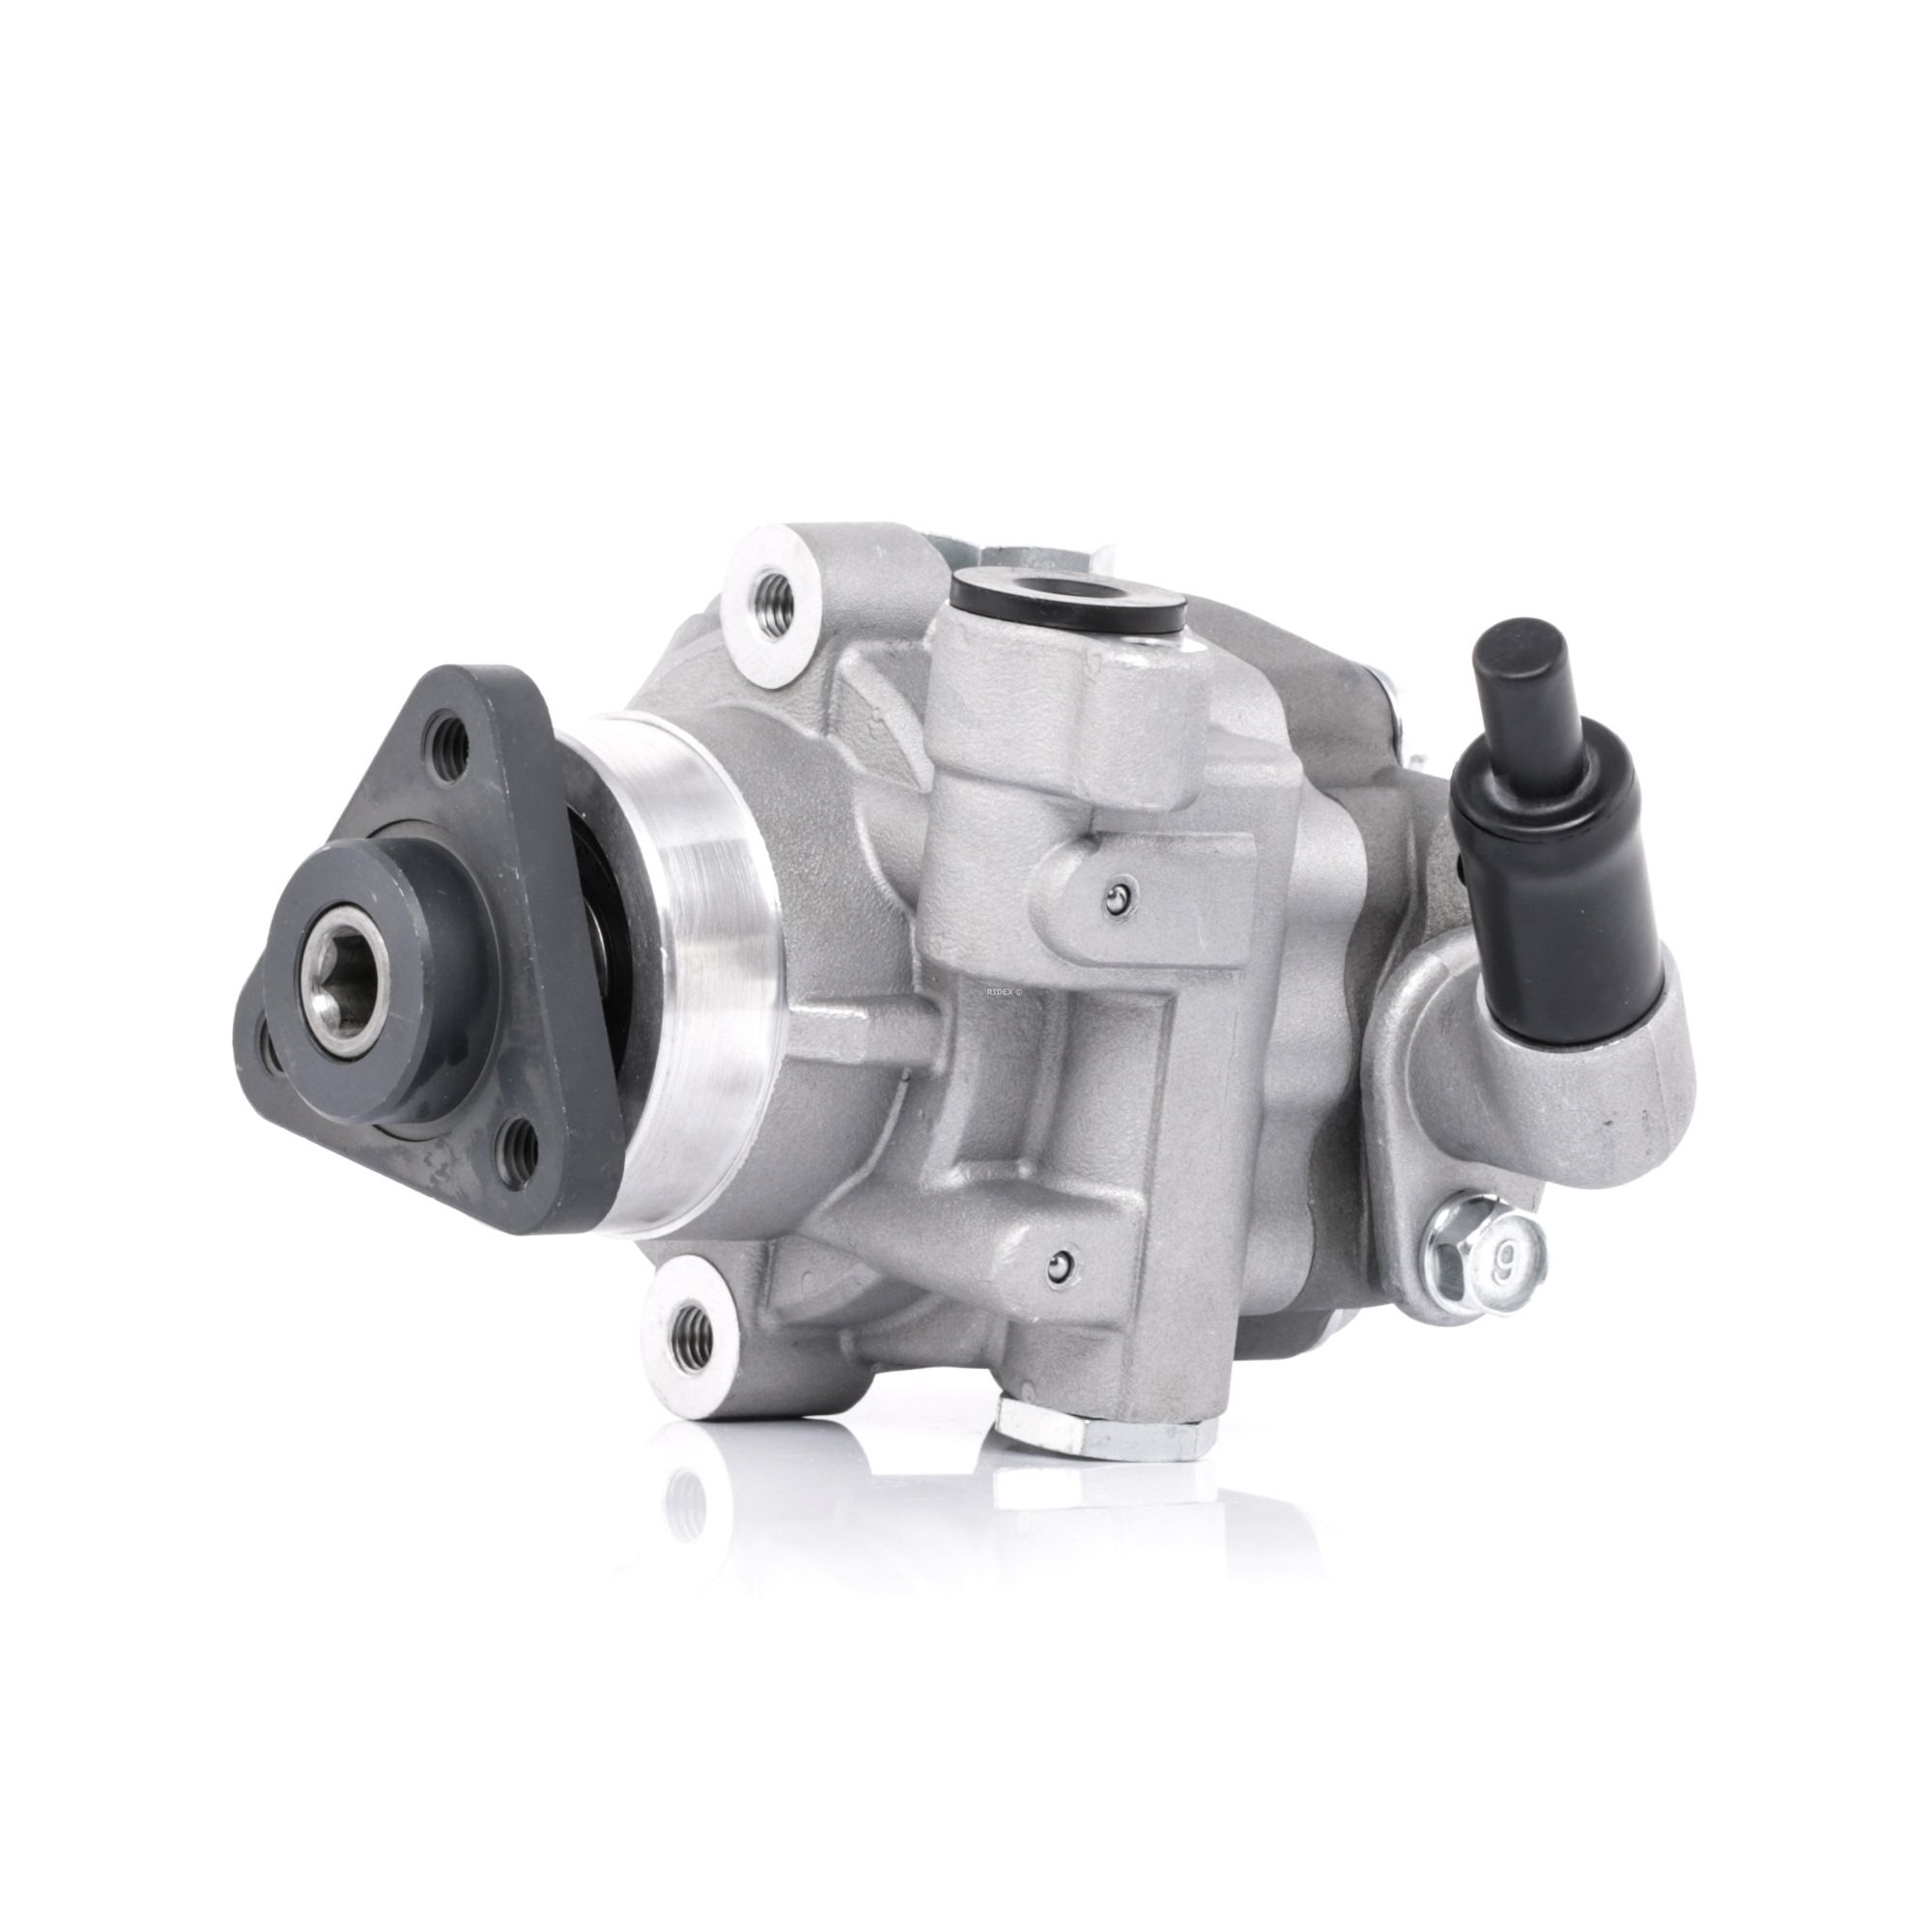 Image of RIDEX Power Steering Pump VW 12H0093 PB4911041700,2H0422154A,7E0422154E Steering Pump,EHPS,EHPS Pump,Hydraulic Pump, steering system